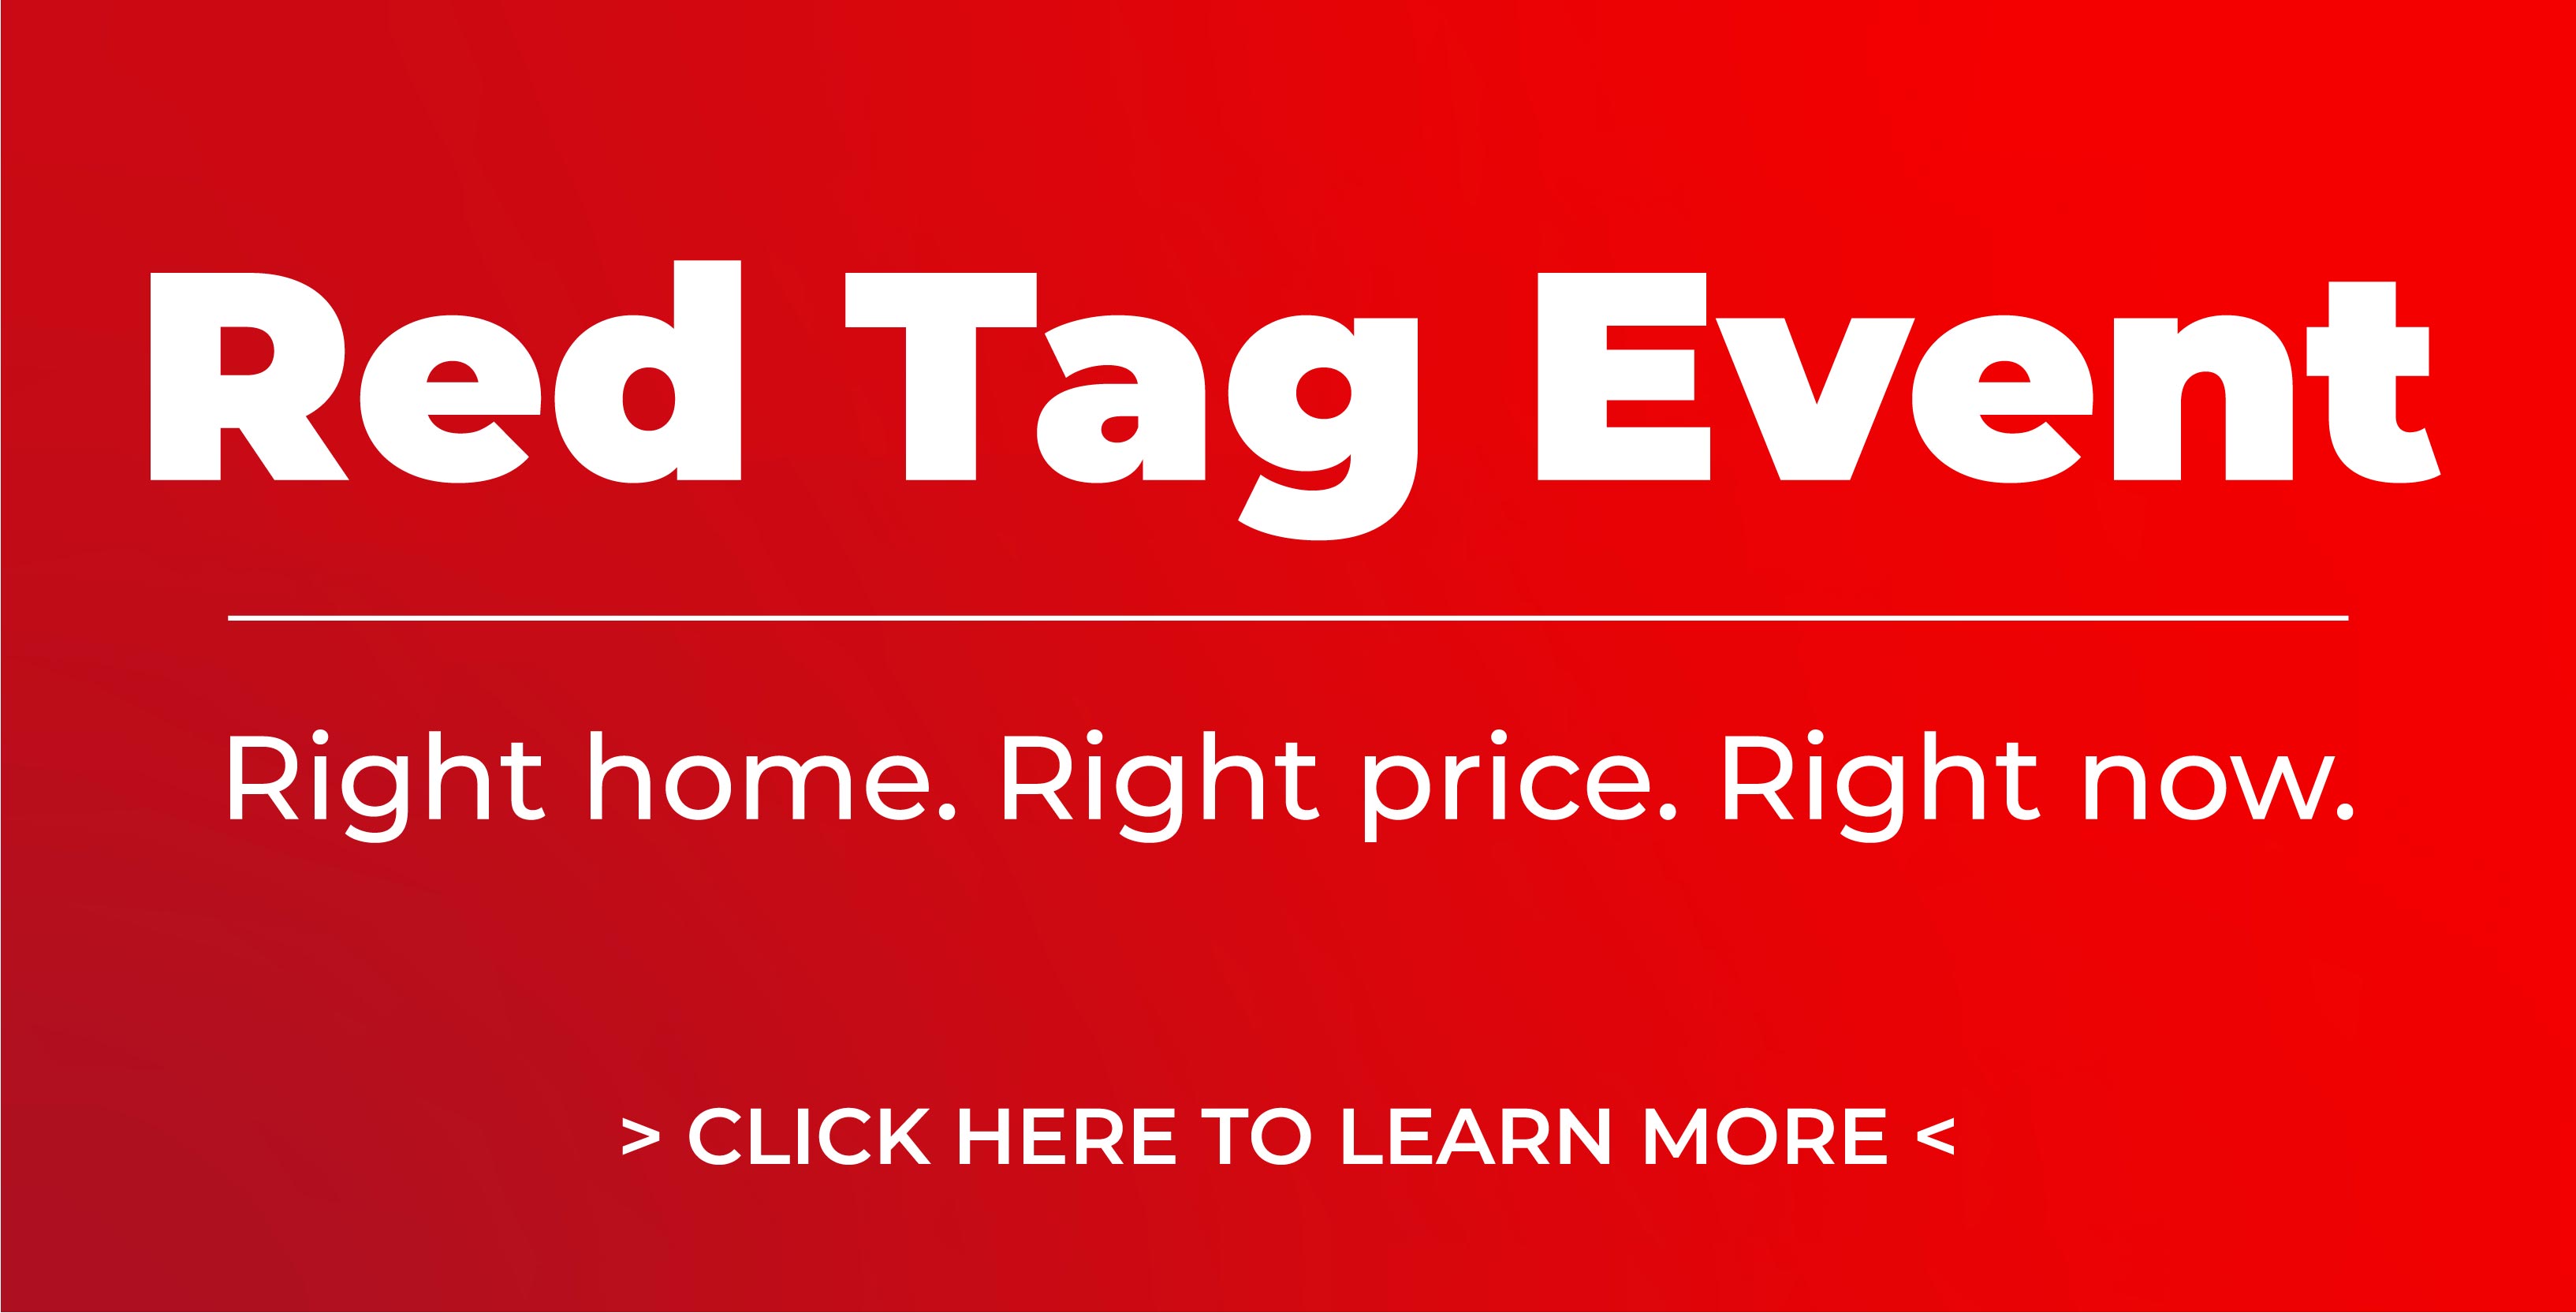 Red Tag Event Right home. Right price. Right now.